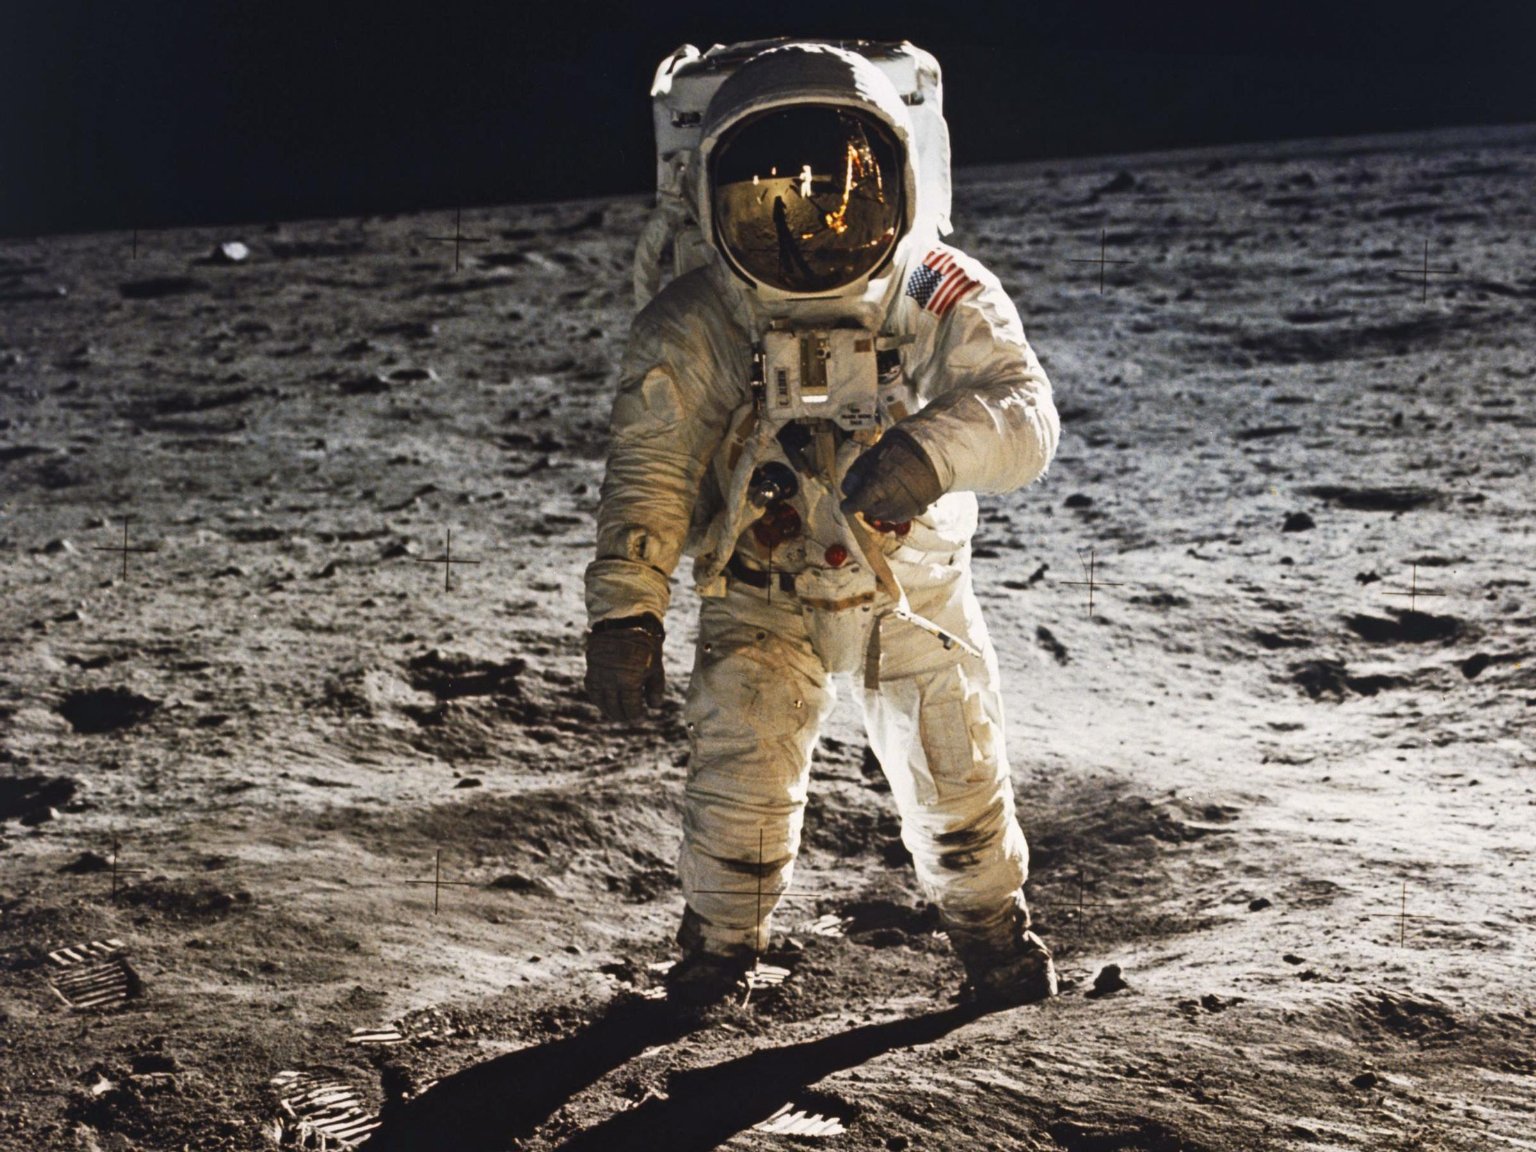 Apollo 11 Was a Voyage of Discovery About Our Solar System